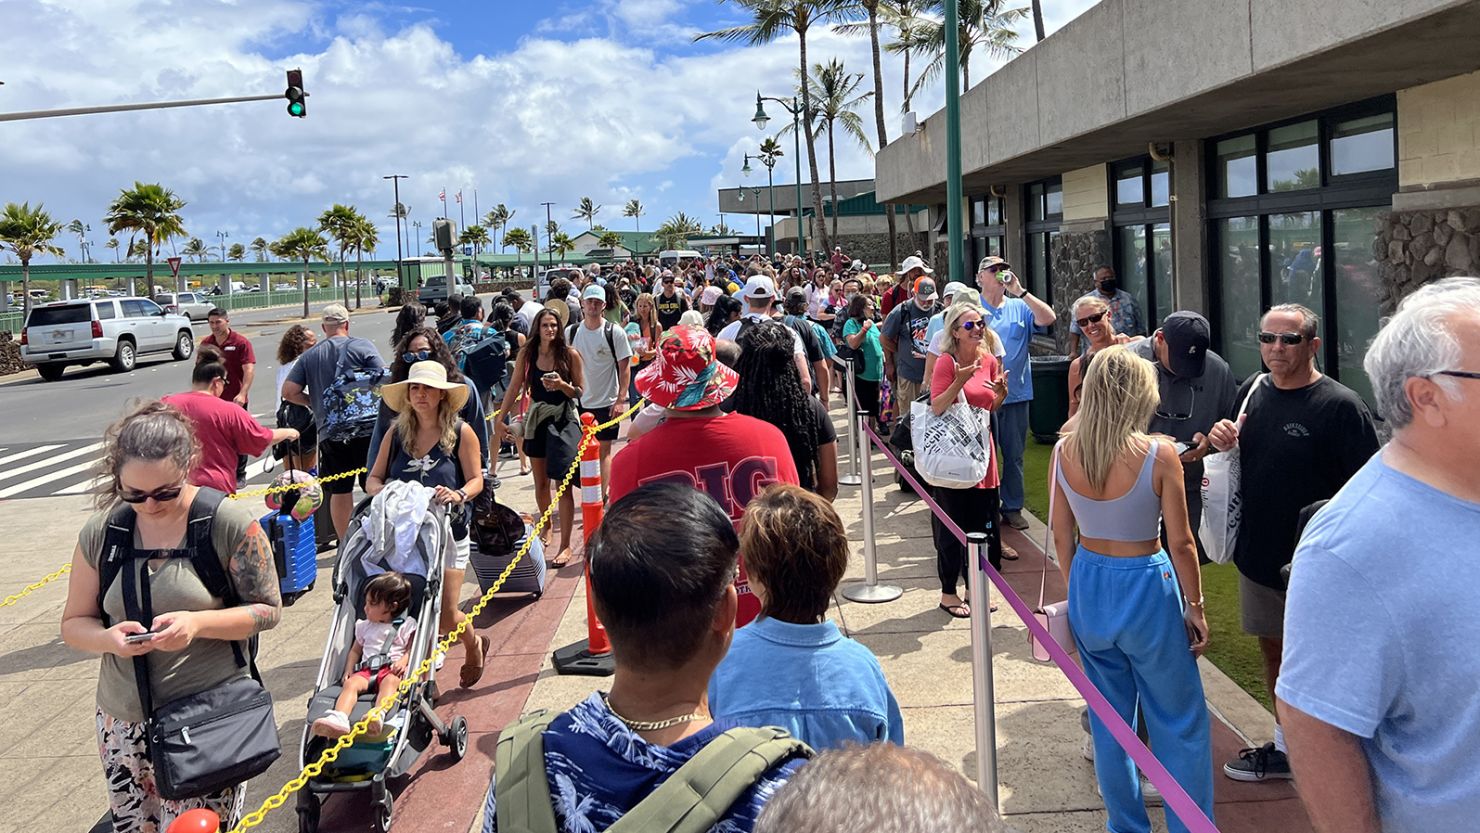 Extremely long security lines extending beyond the terminal building and onto the street outside the Kahului airport in Maui, Kahului, Hawaii, August 1st 2022. 